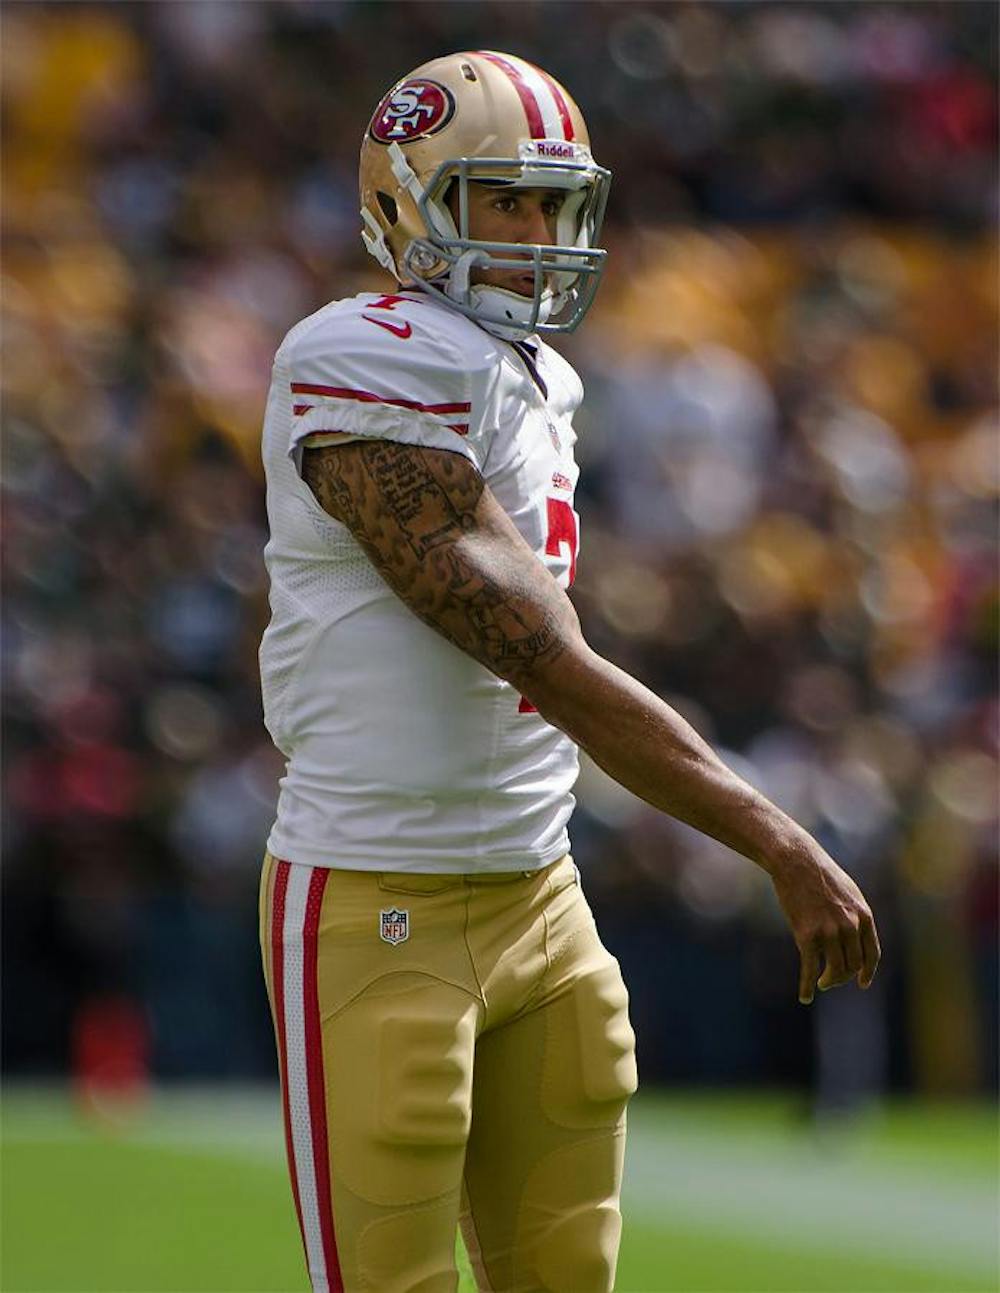 On August 26, 2016, Colin Kaepernick sat down during the playing of the U.S. national anthem. 